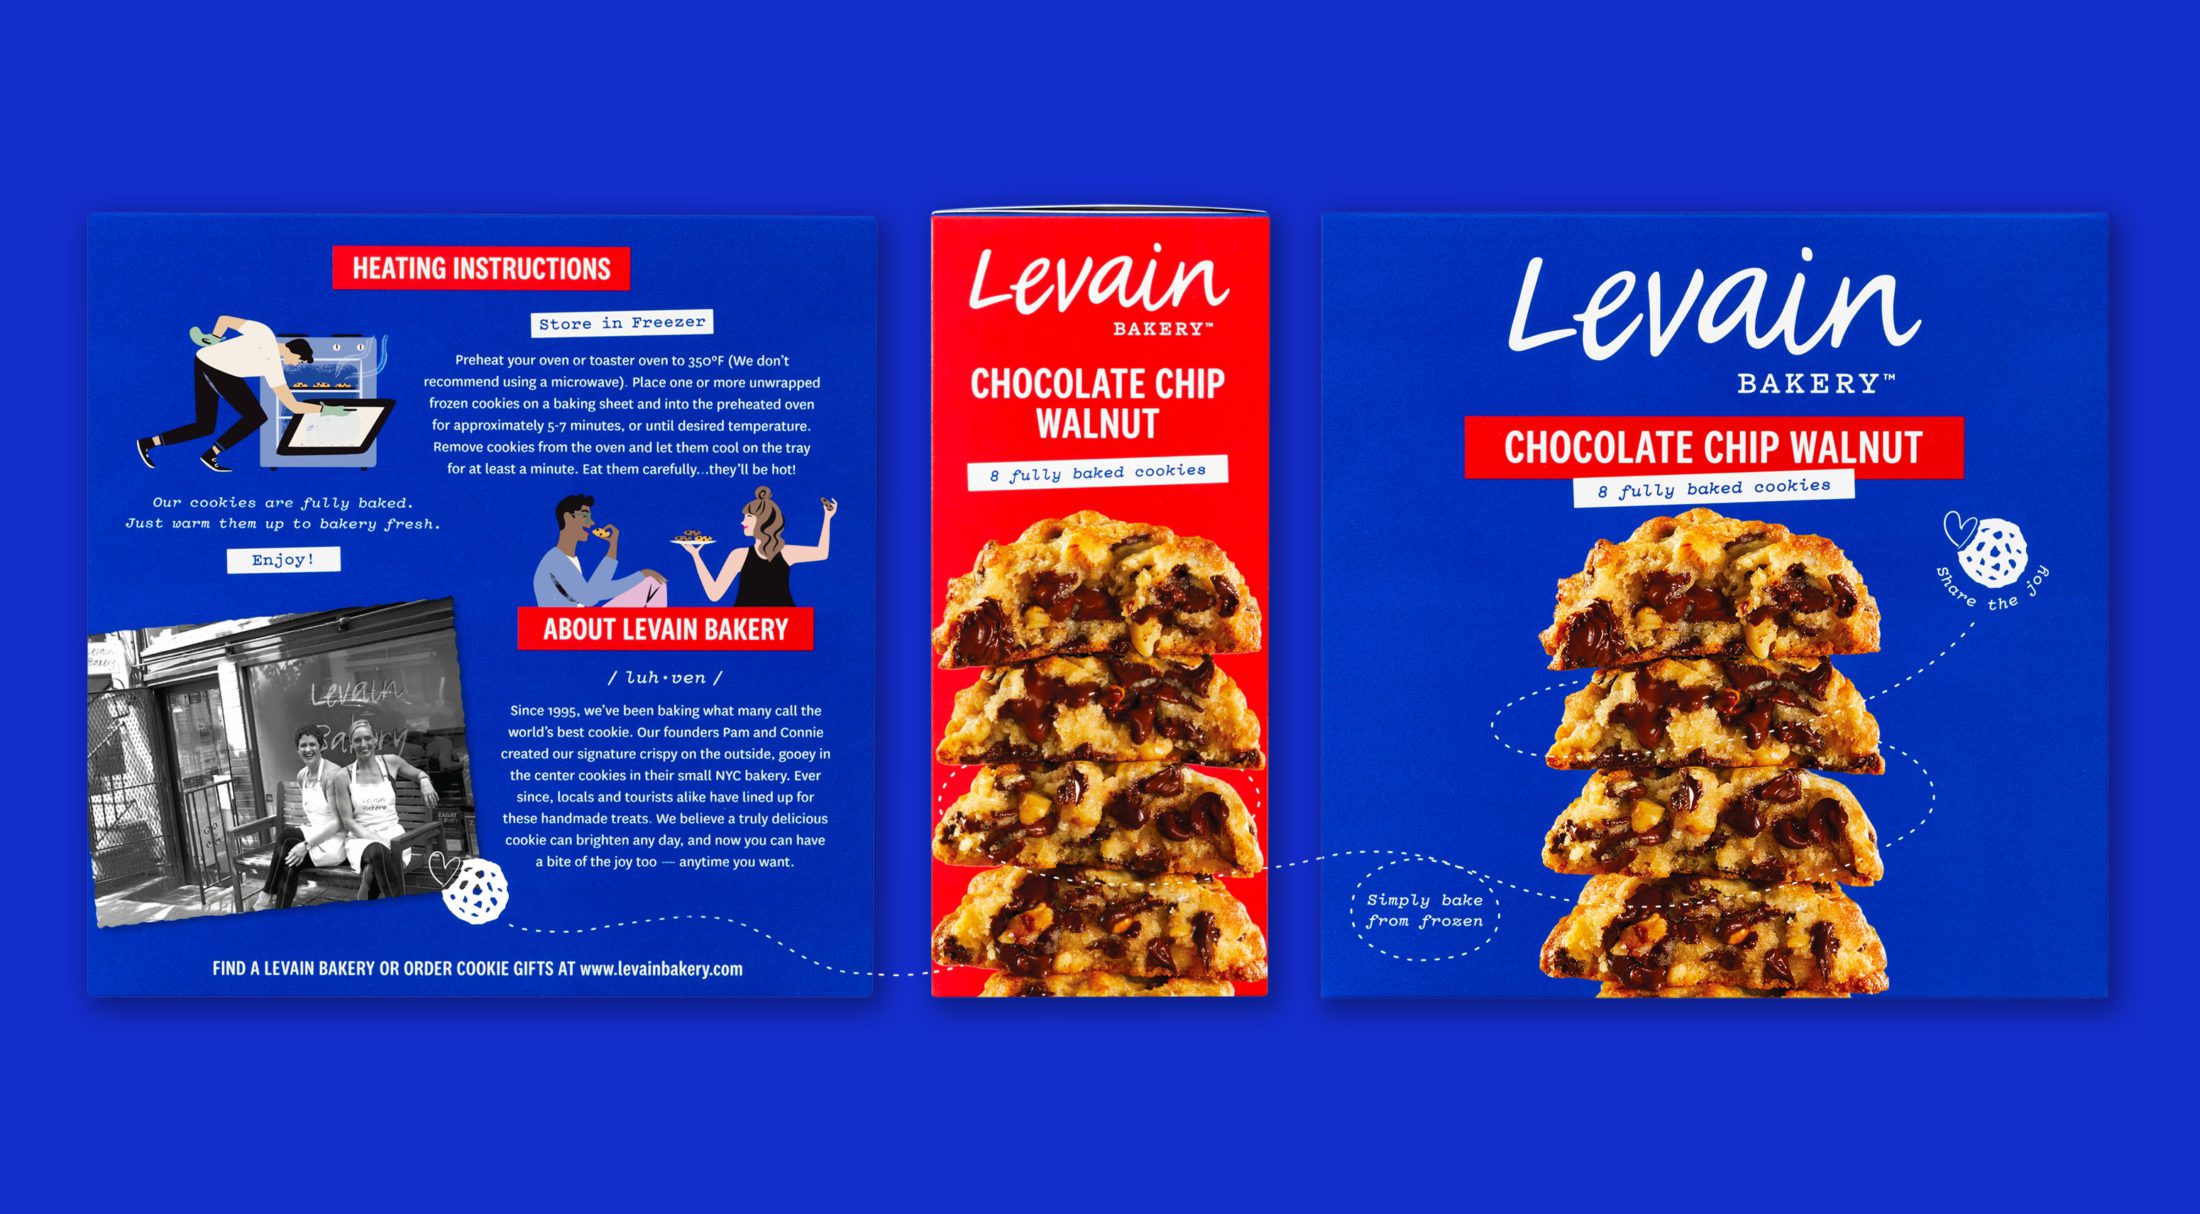 An overview of the Levain Bakery Chocolate Chip Walnut Frozen Cookie box. Featured from left to right - the back panel, left side red panel, and front panel.